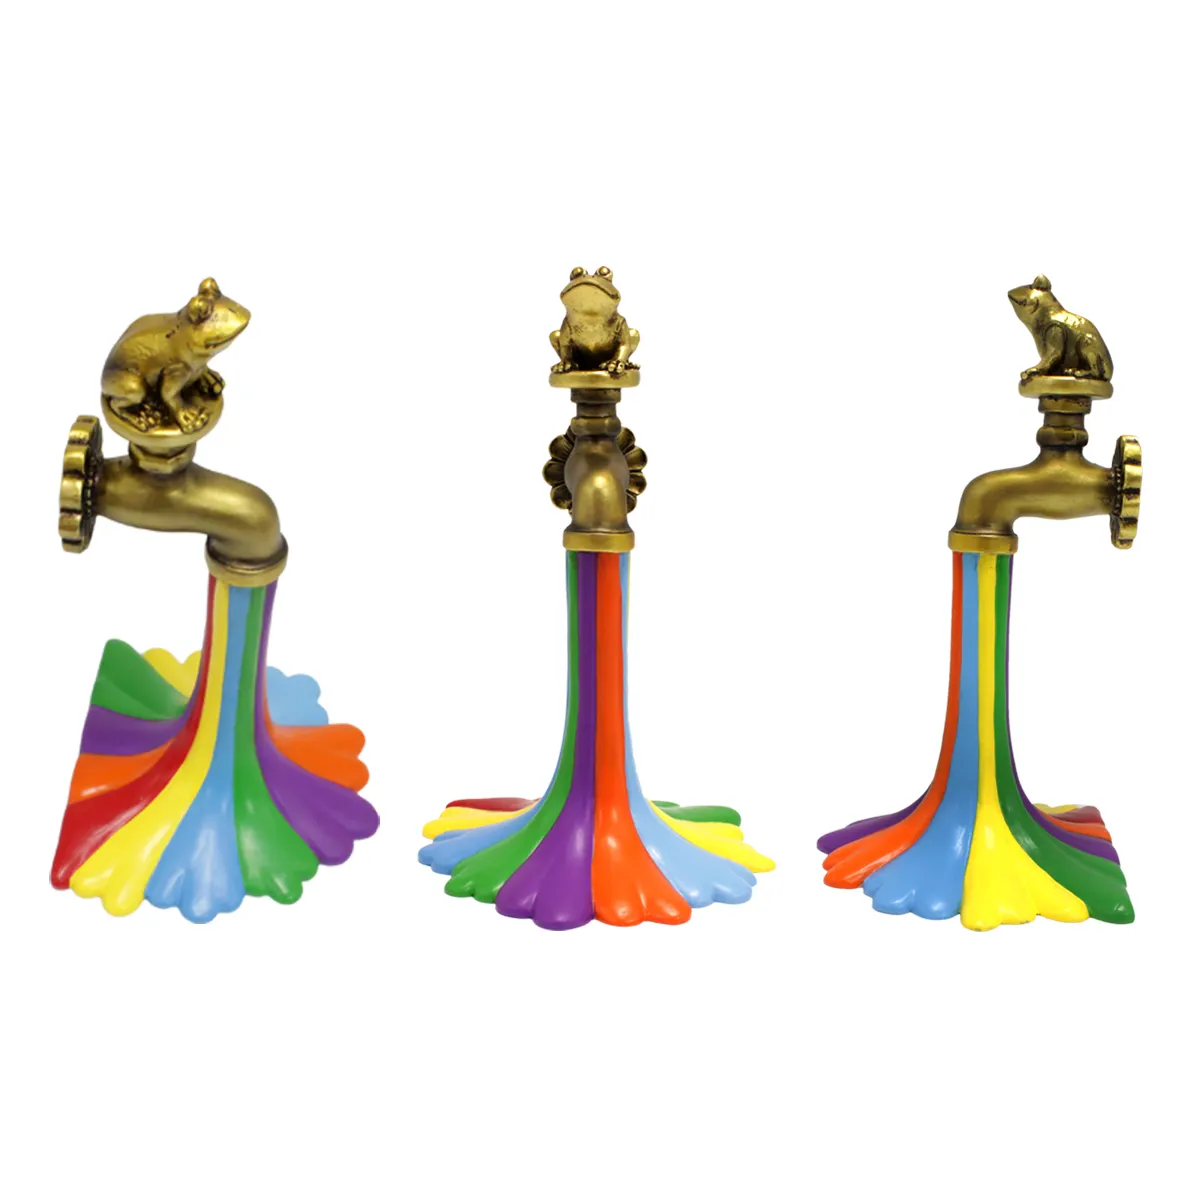 Decorative Outdoor Garden Faucet Retro Brass Water Hose Tap Wall Mounted Rainbow Water Faucet